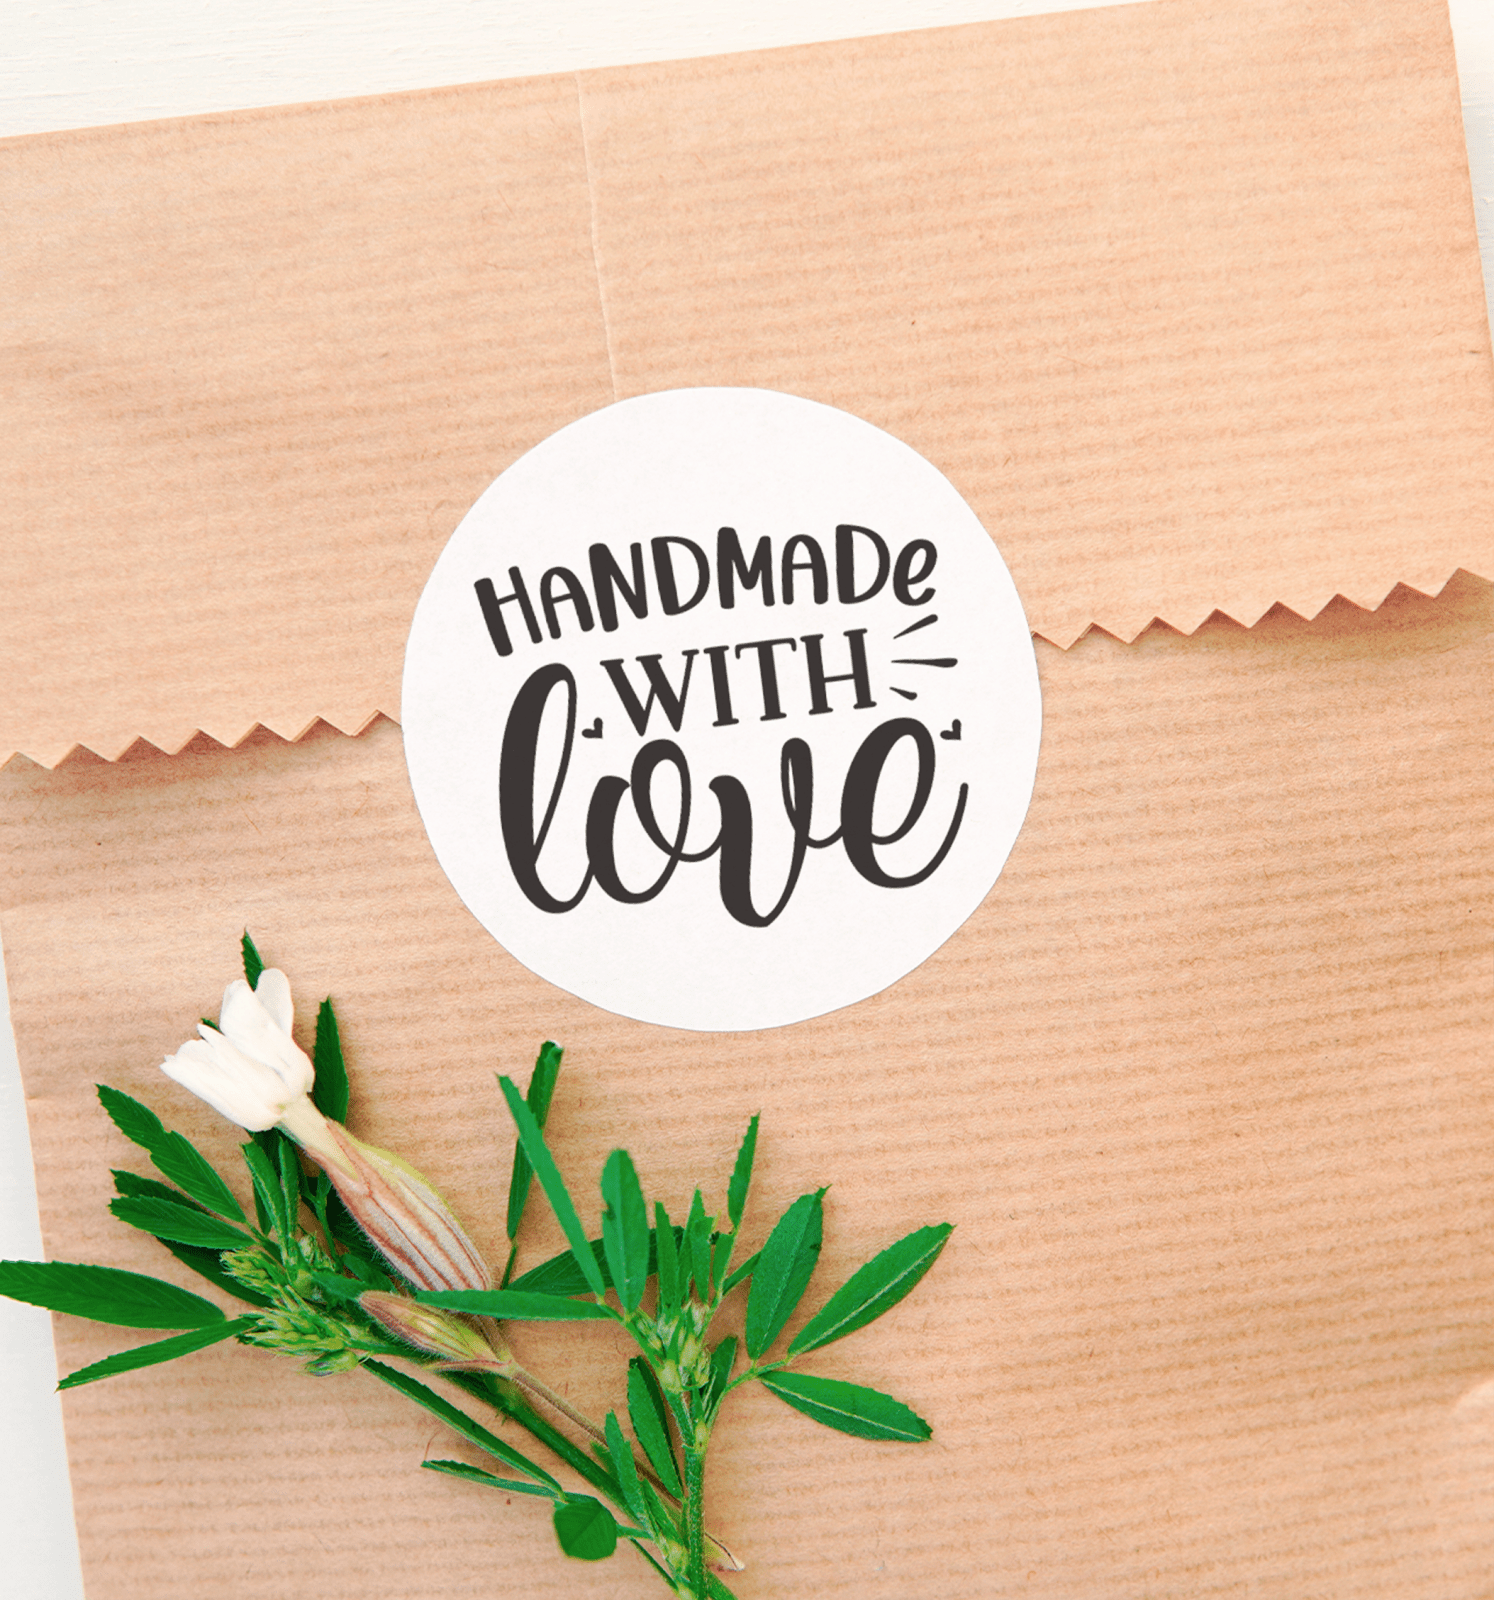 handmade-with-love-sticker-557731.png